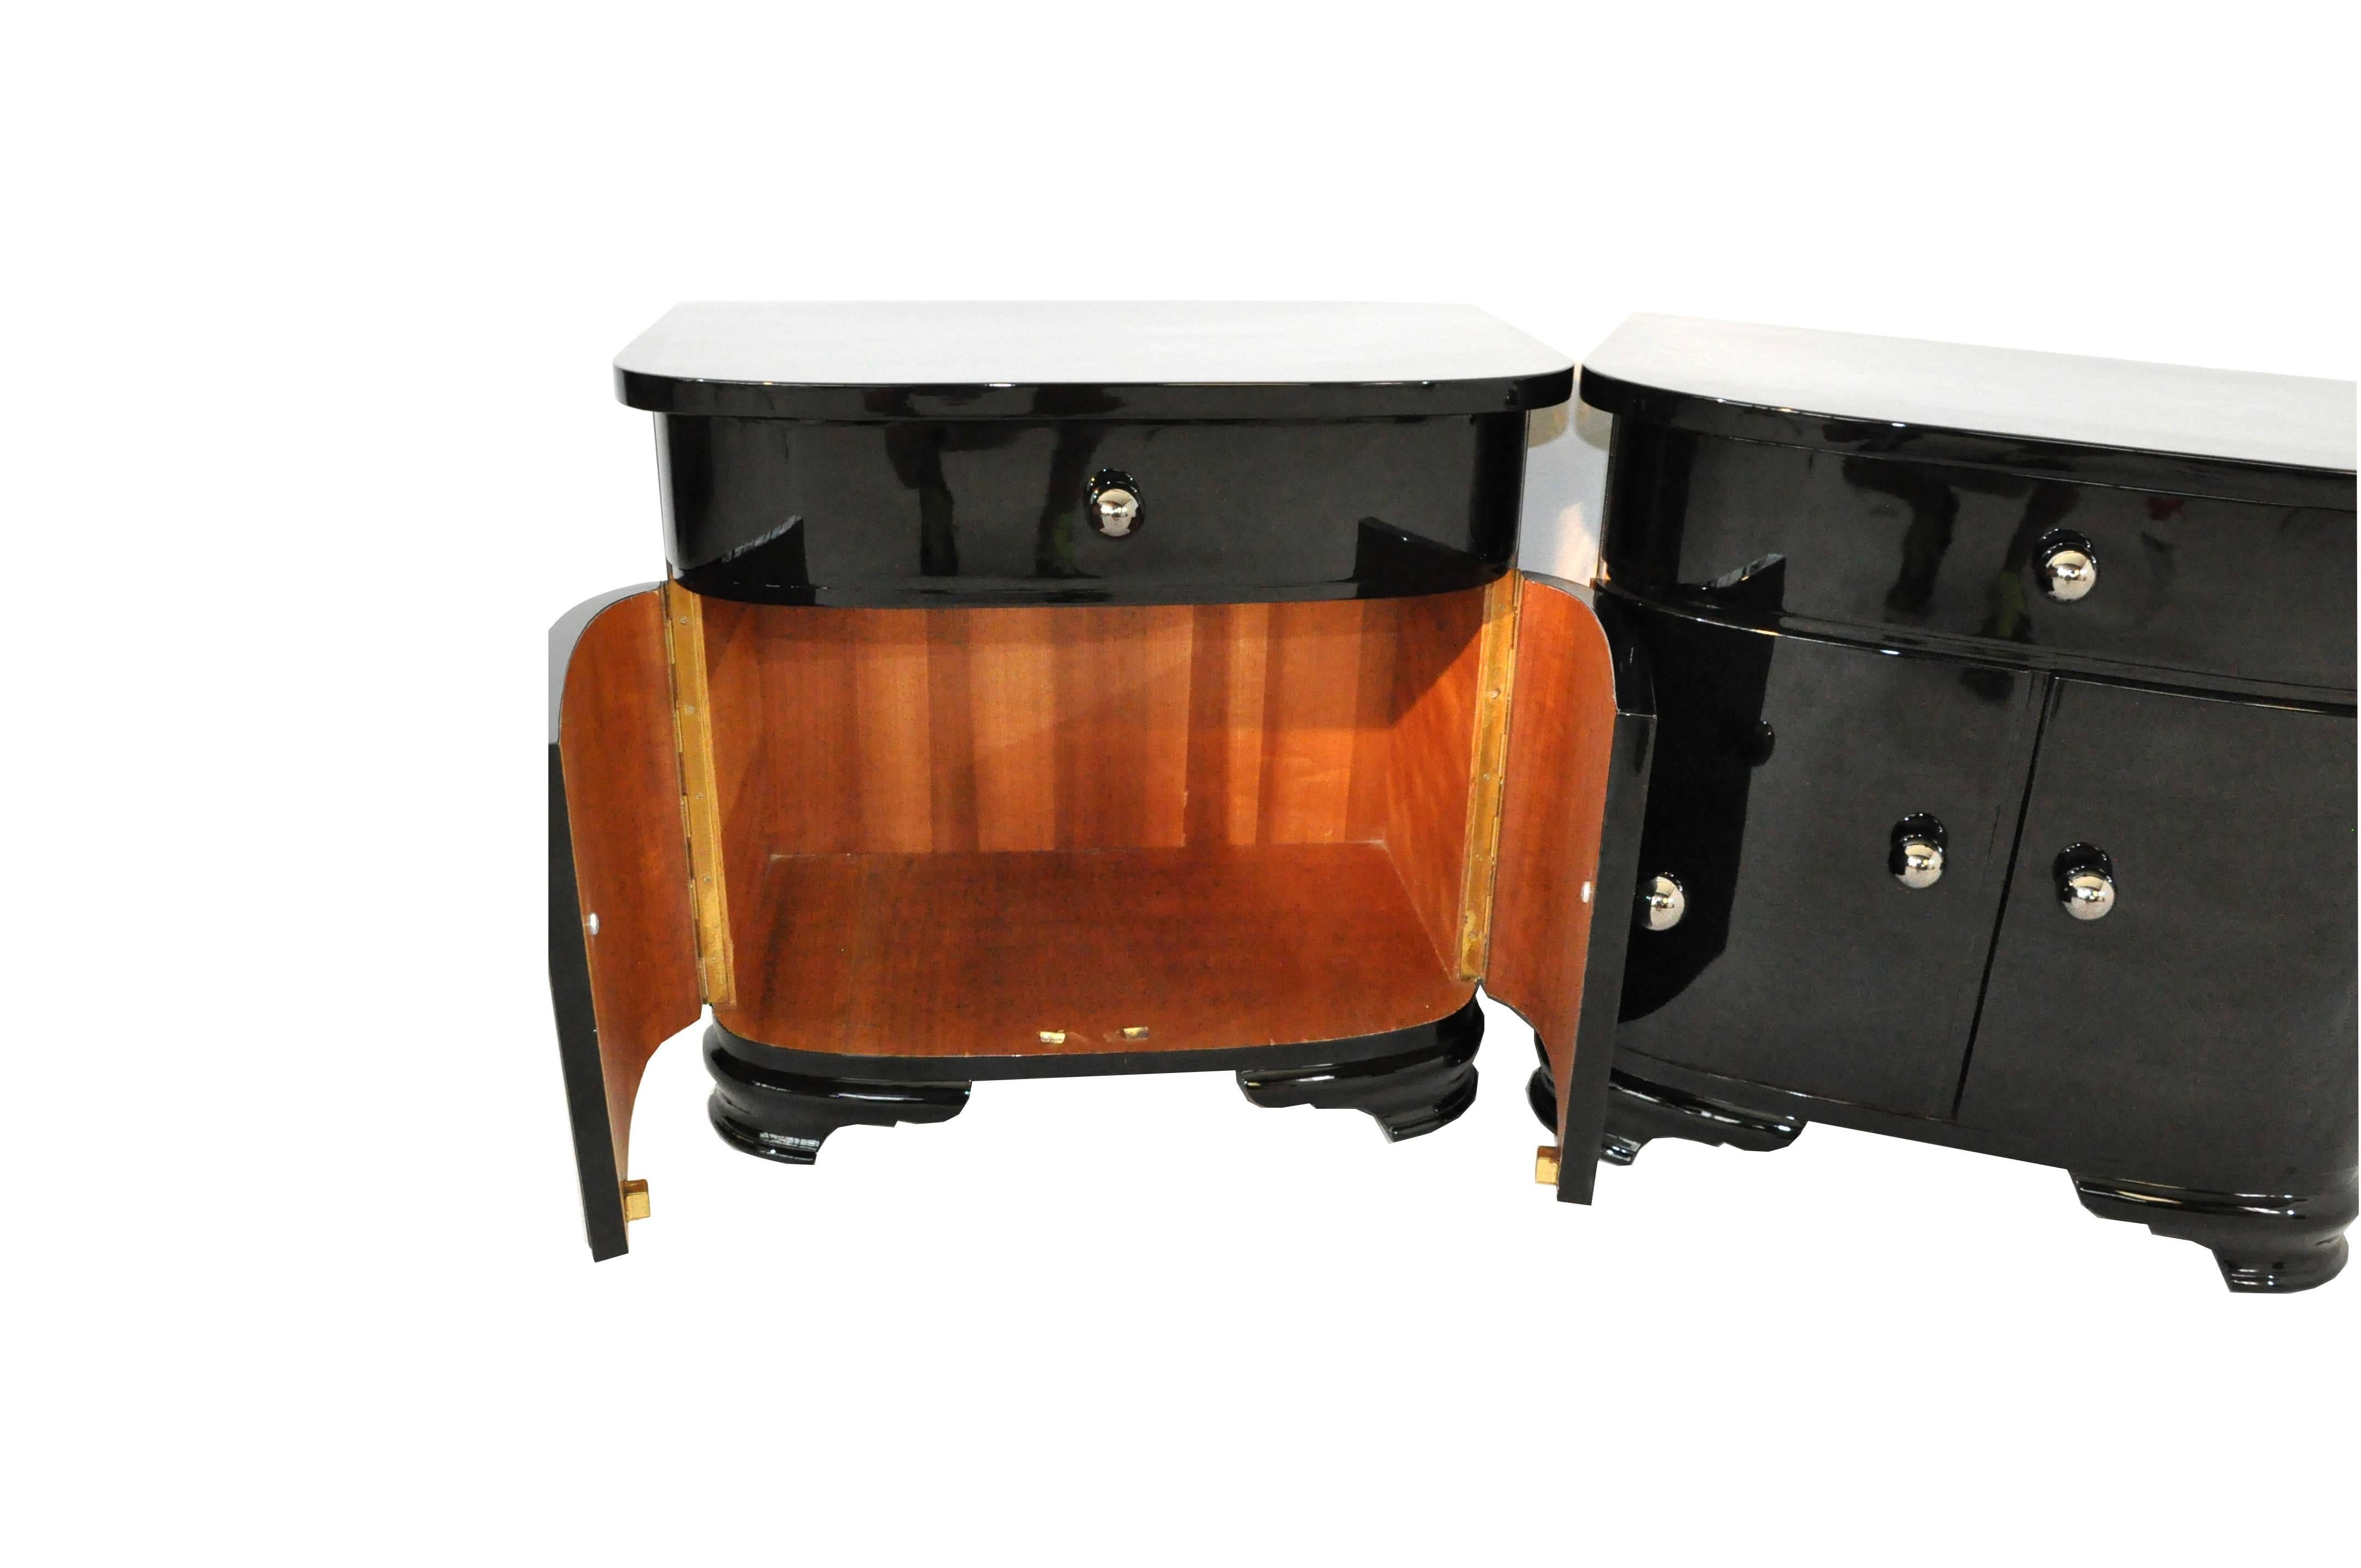 Mahogany Pair of Piano Lacquer Night Stands from the Art Deco Era